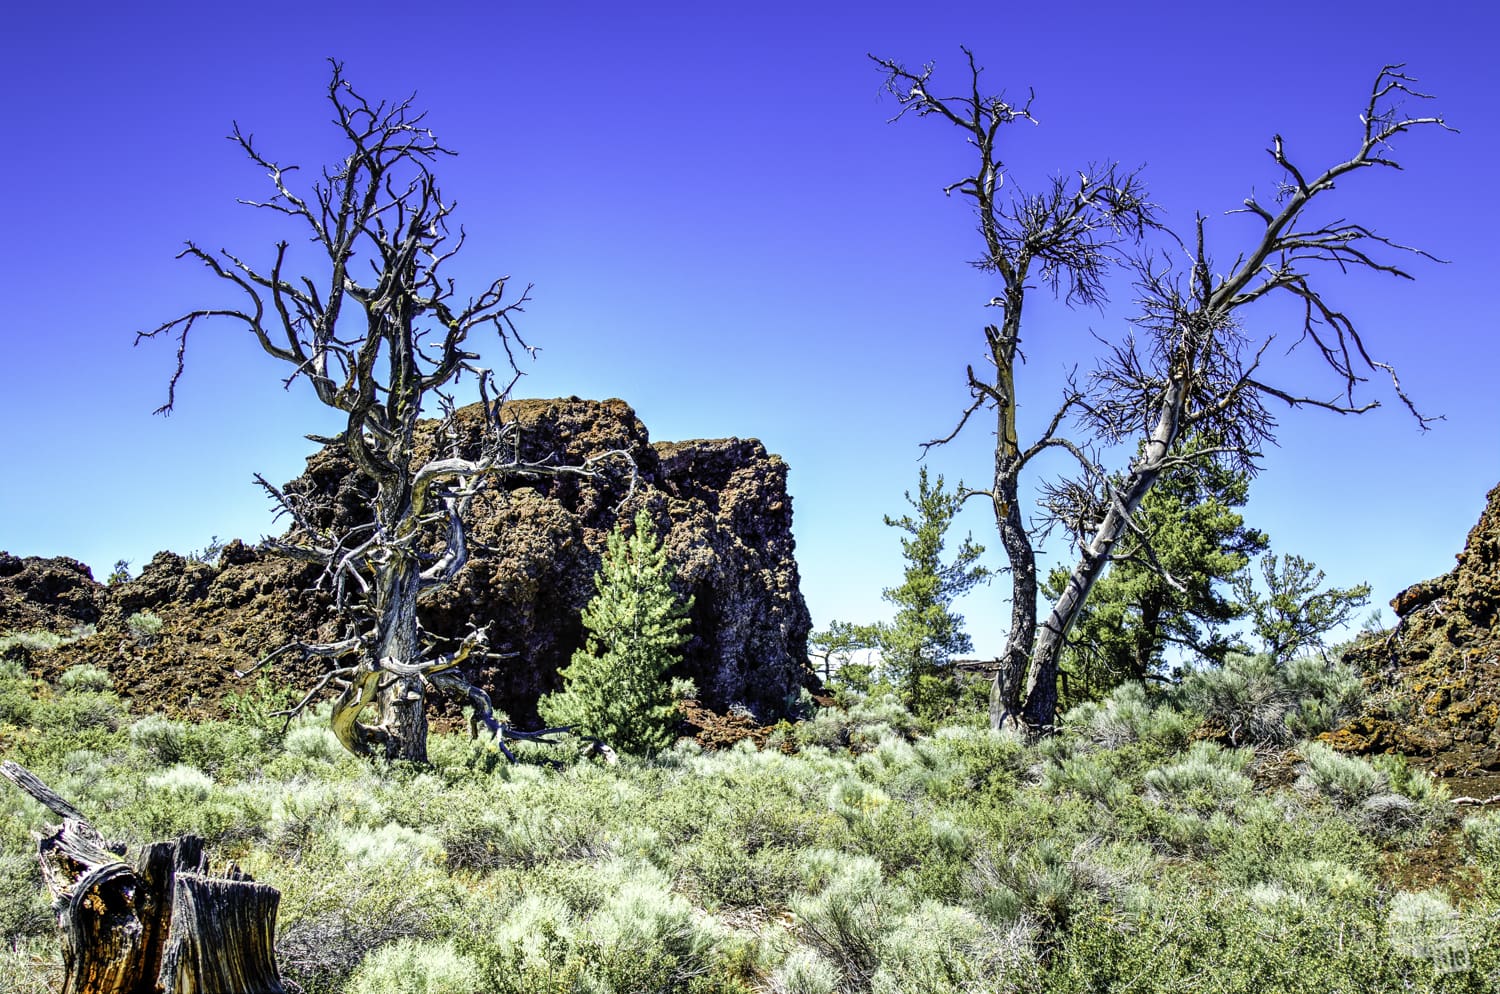 Devil's Orchard in Craters of the Moon National Monument